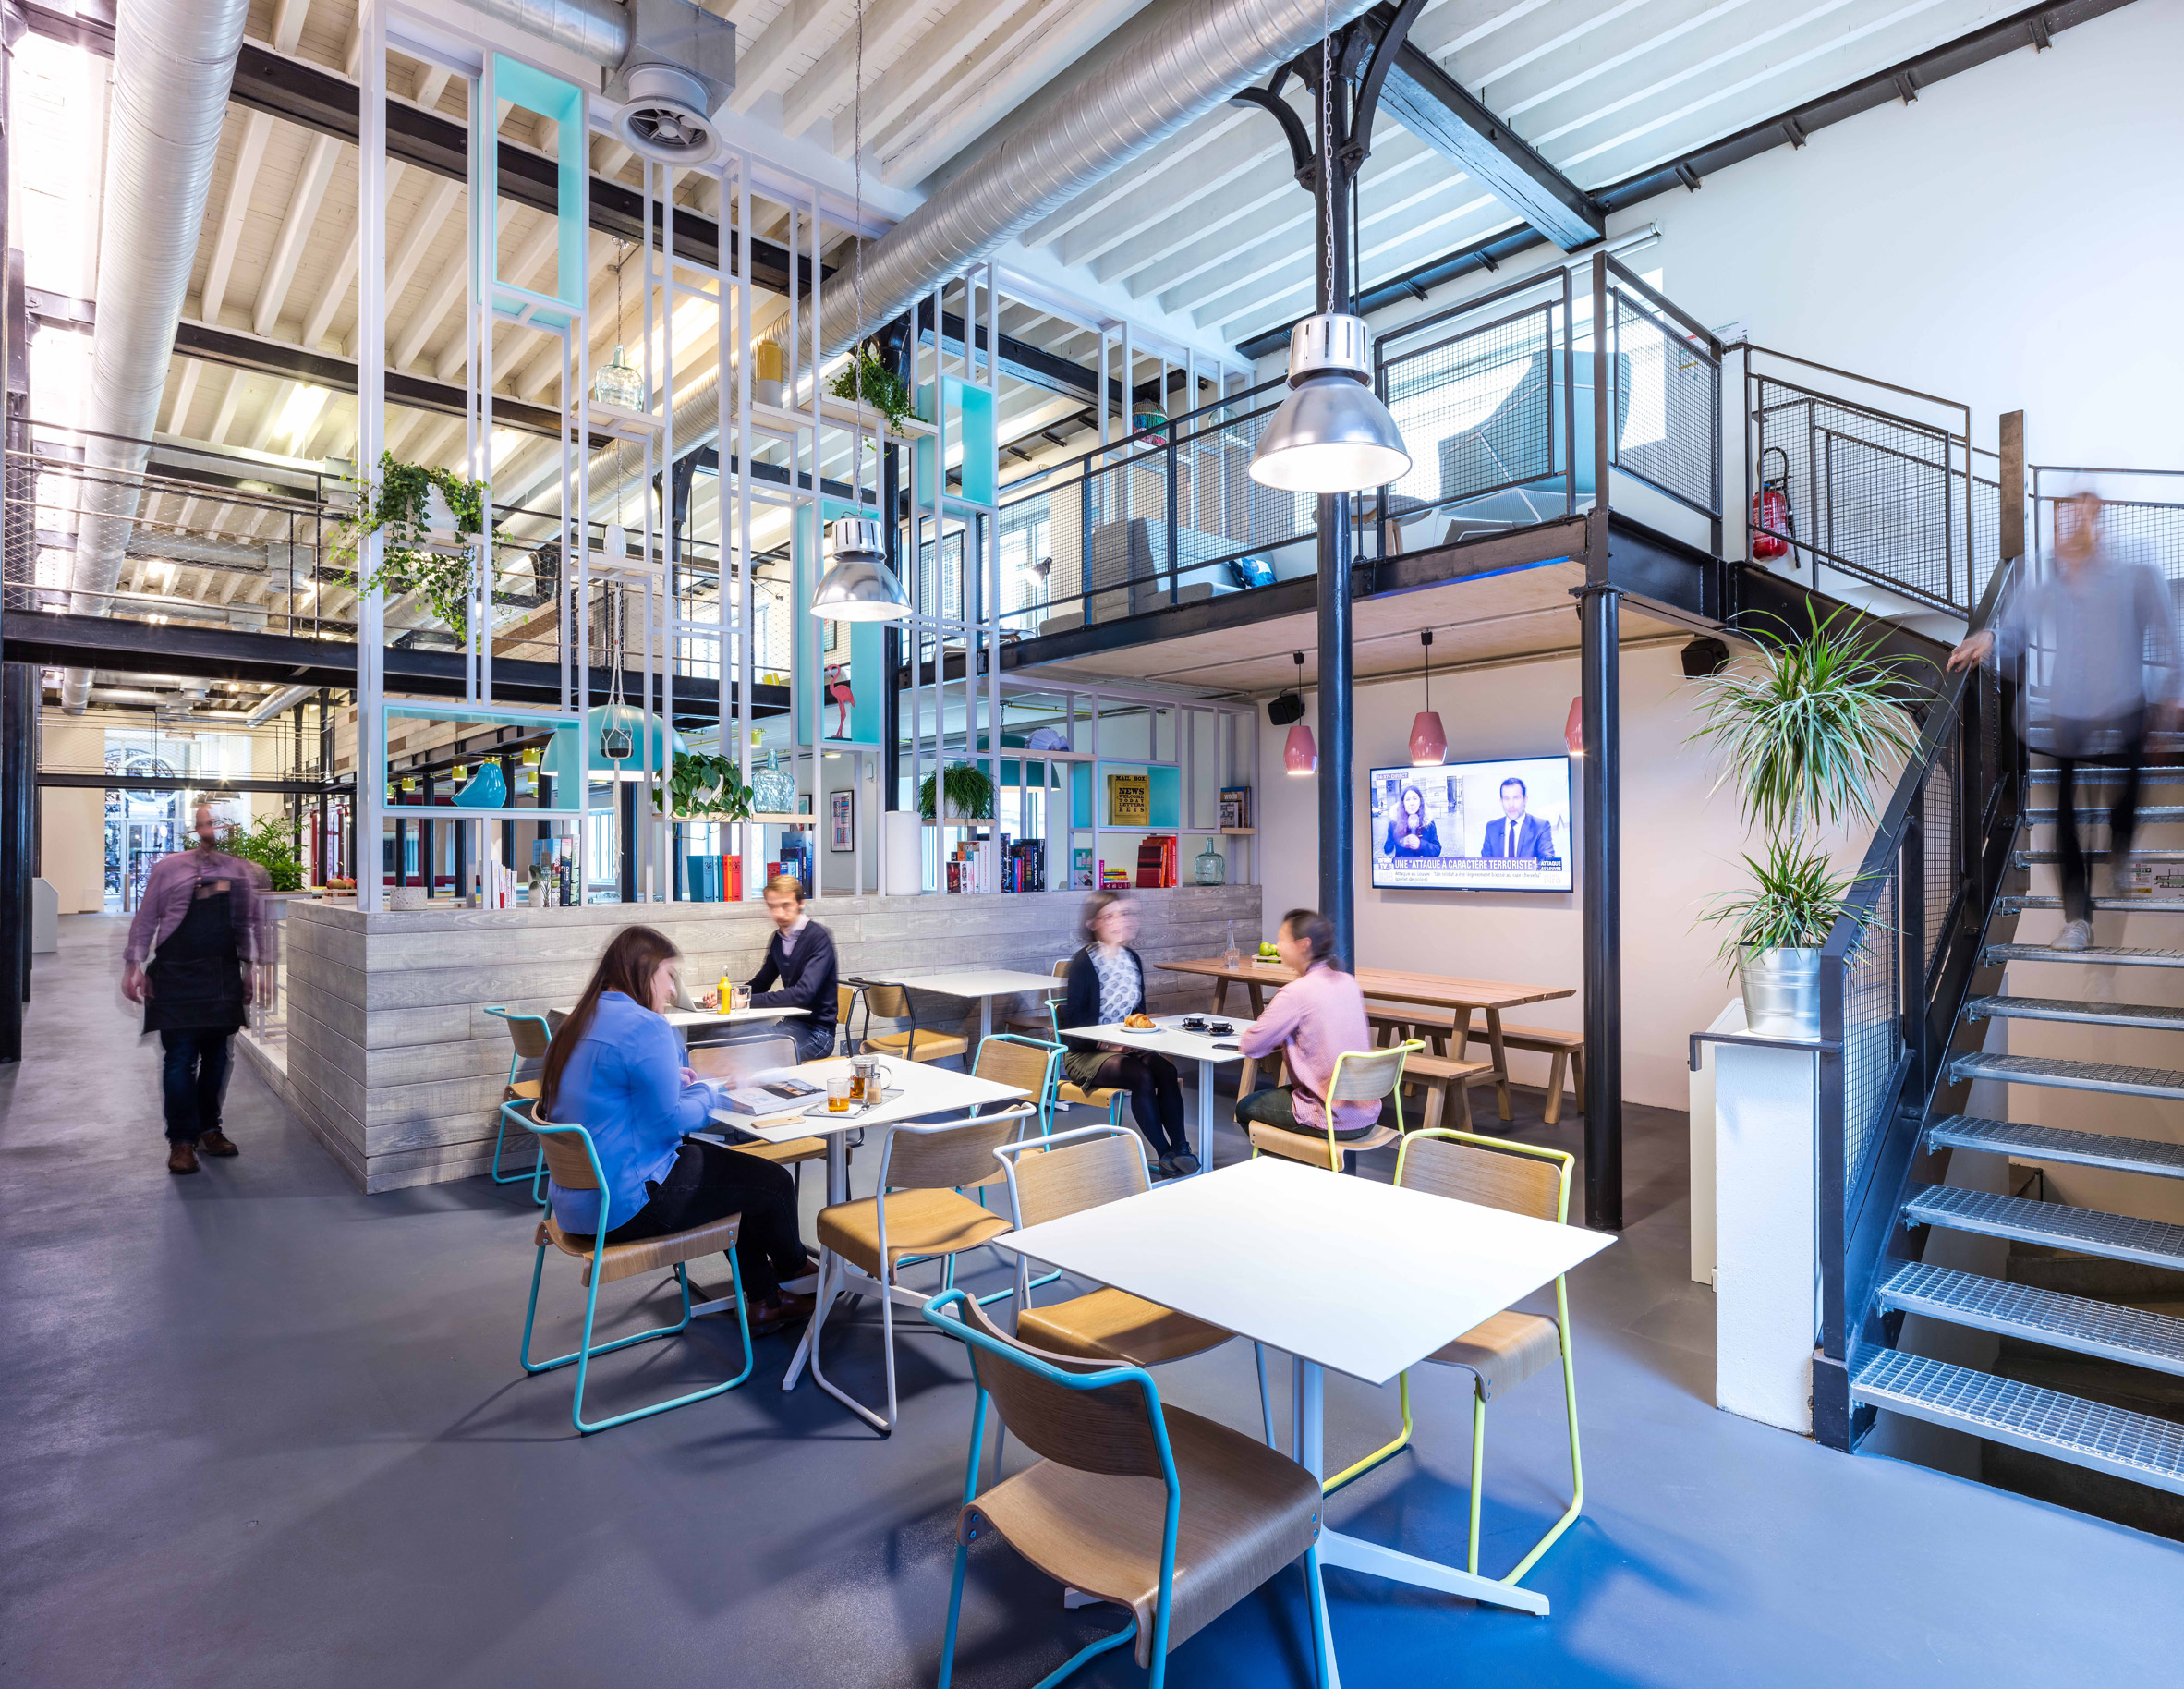 MoreySmith create co-working offices in former industrial building in Paris